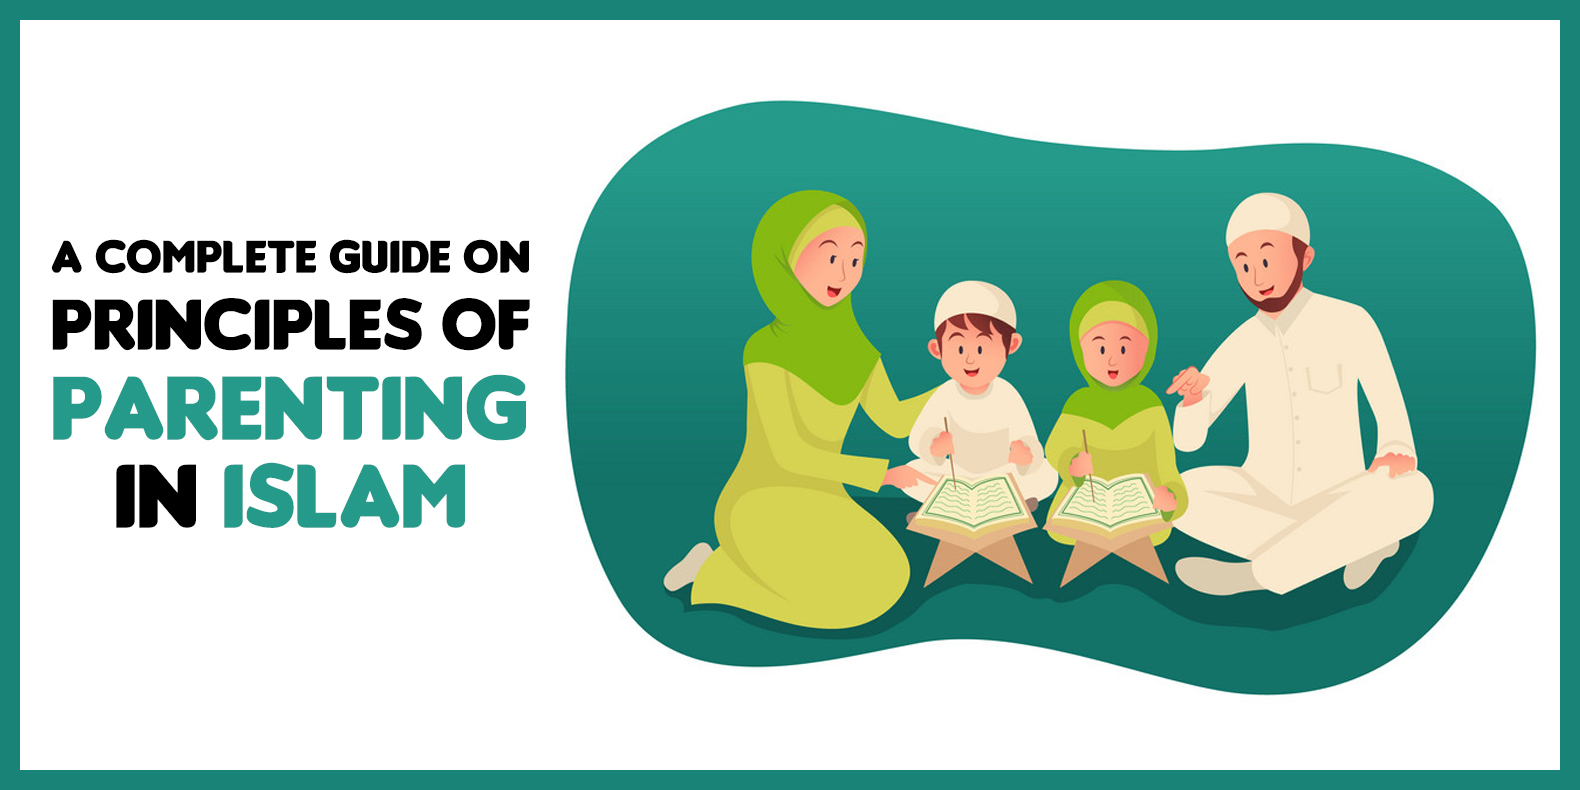 A Complete Guide on Principles of Parenting in Islam